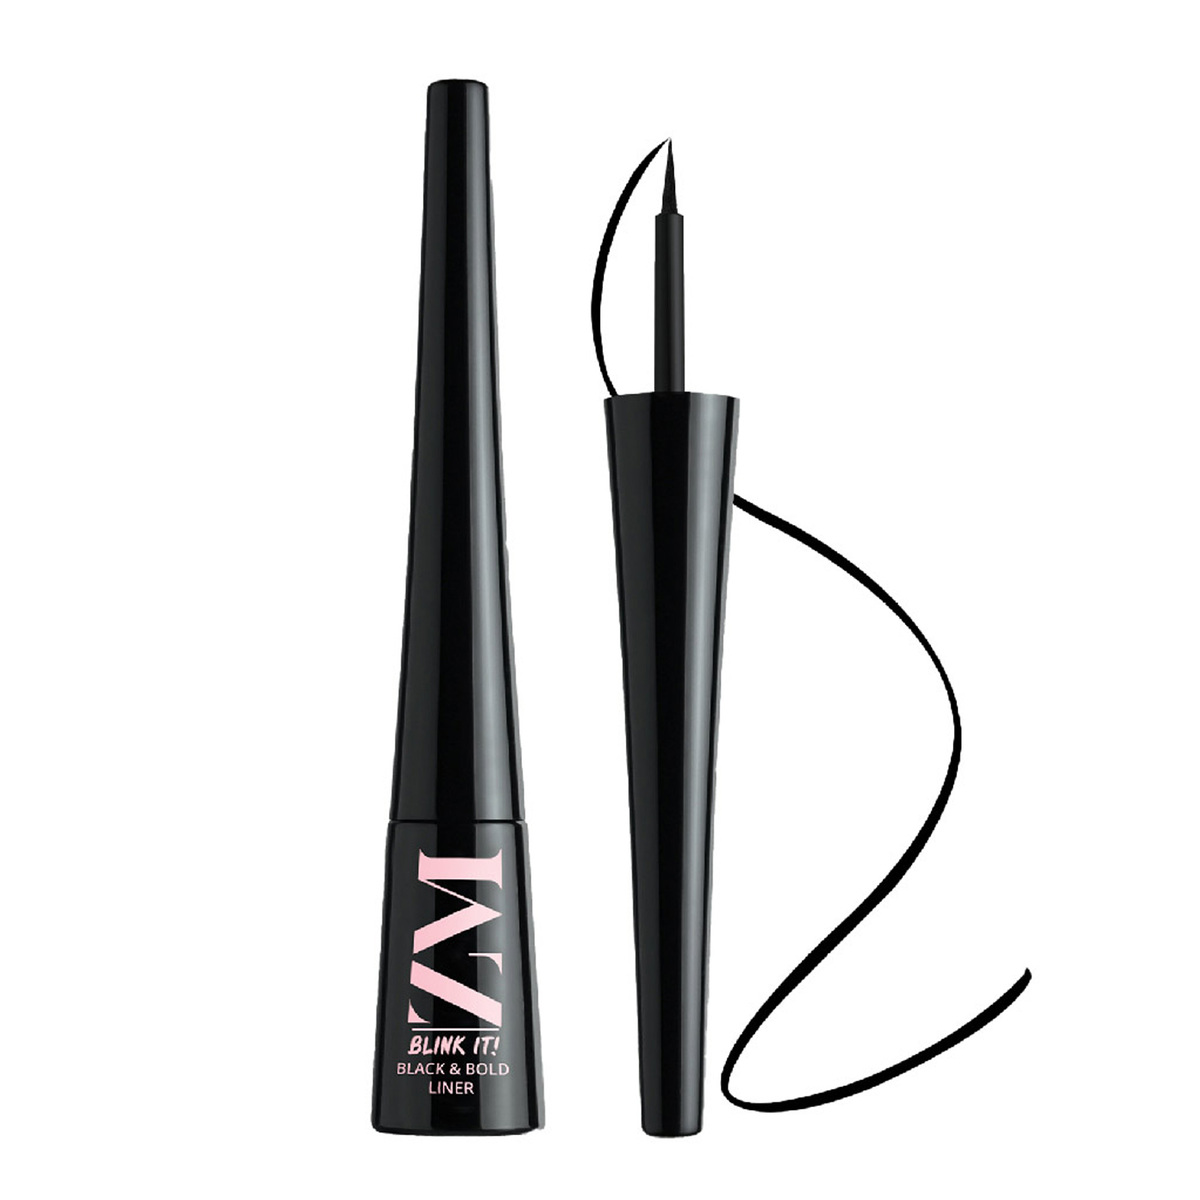 Zayn & Myza Blink it! Liquid Eyeliner, Waterproof and Smudgeproof, Black and Bold, 3 ml